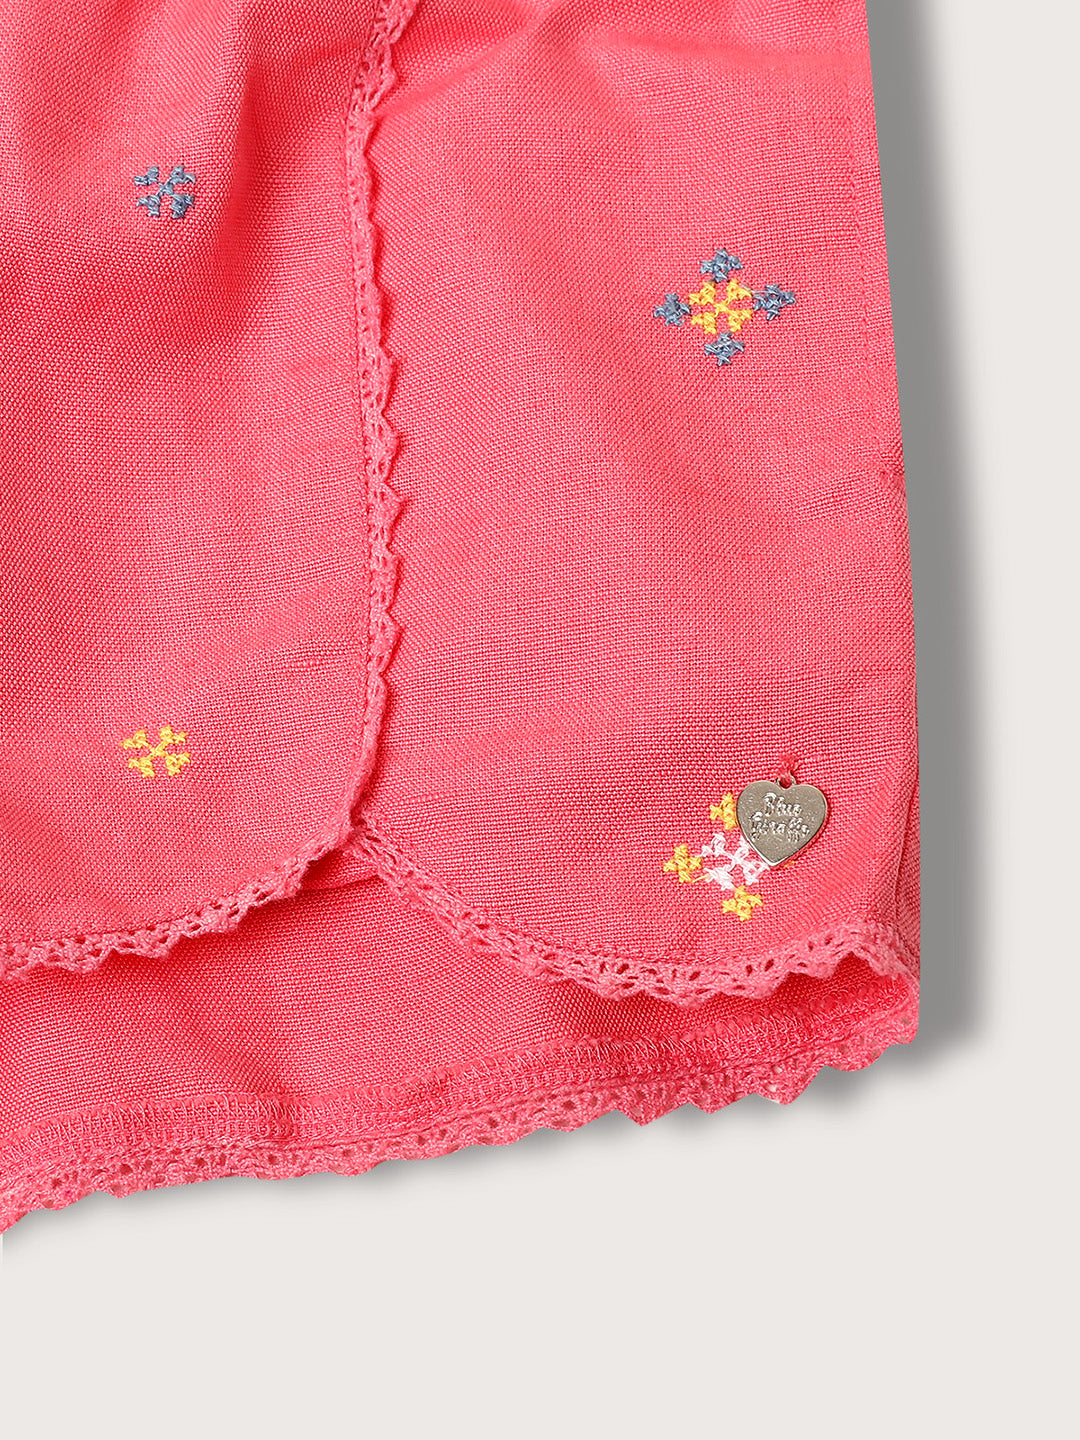 Blue Giraffe Girls Pink Embroidered Square Neck Playsuit